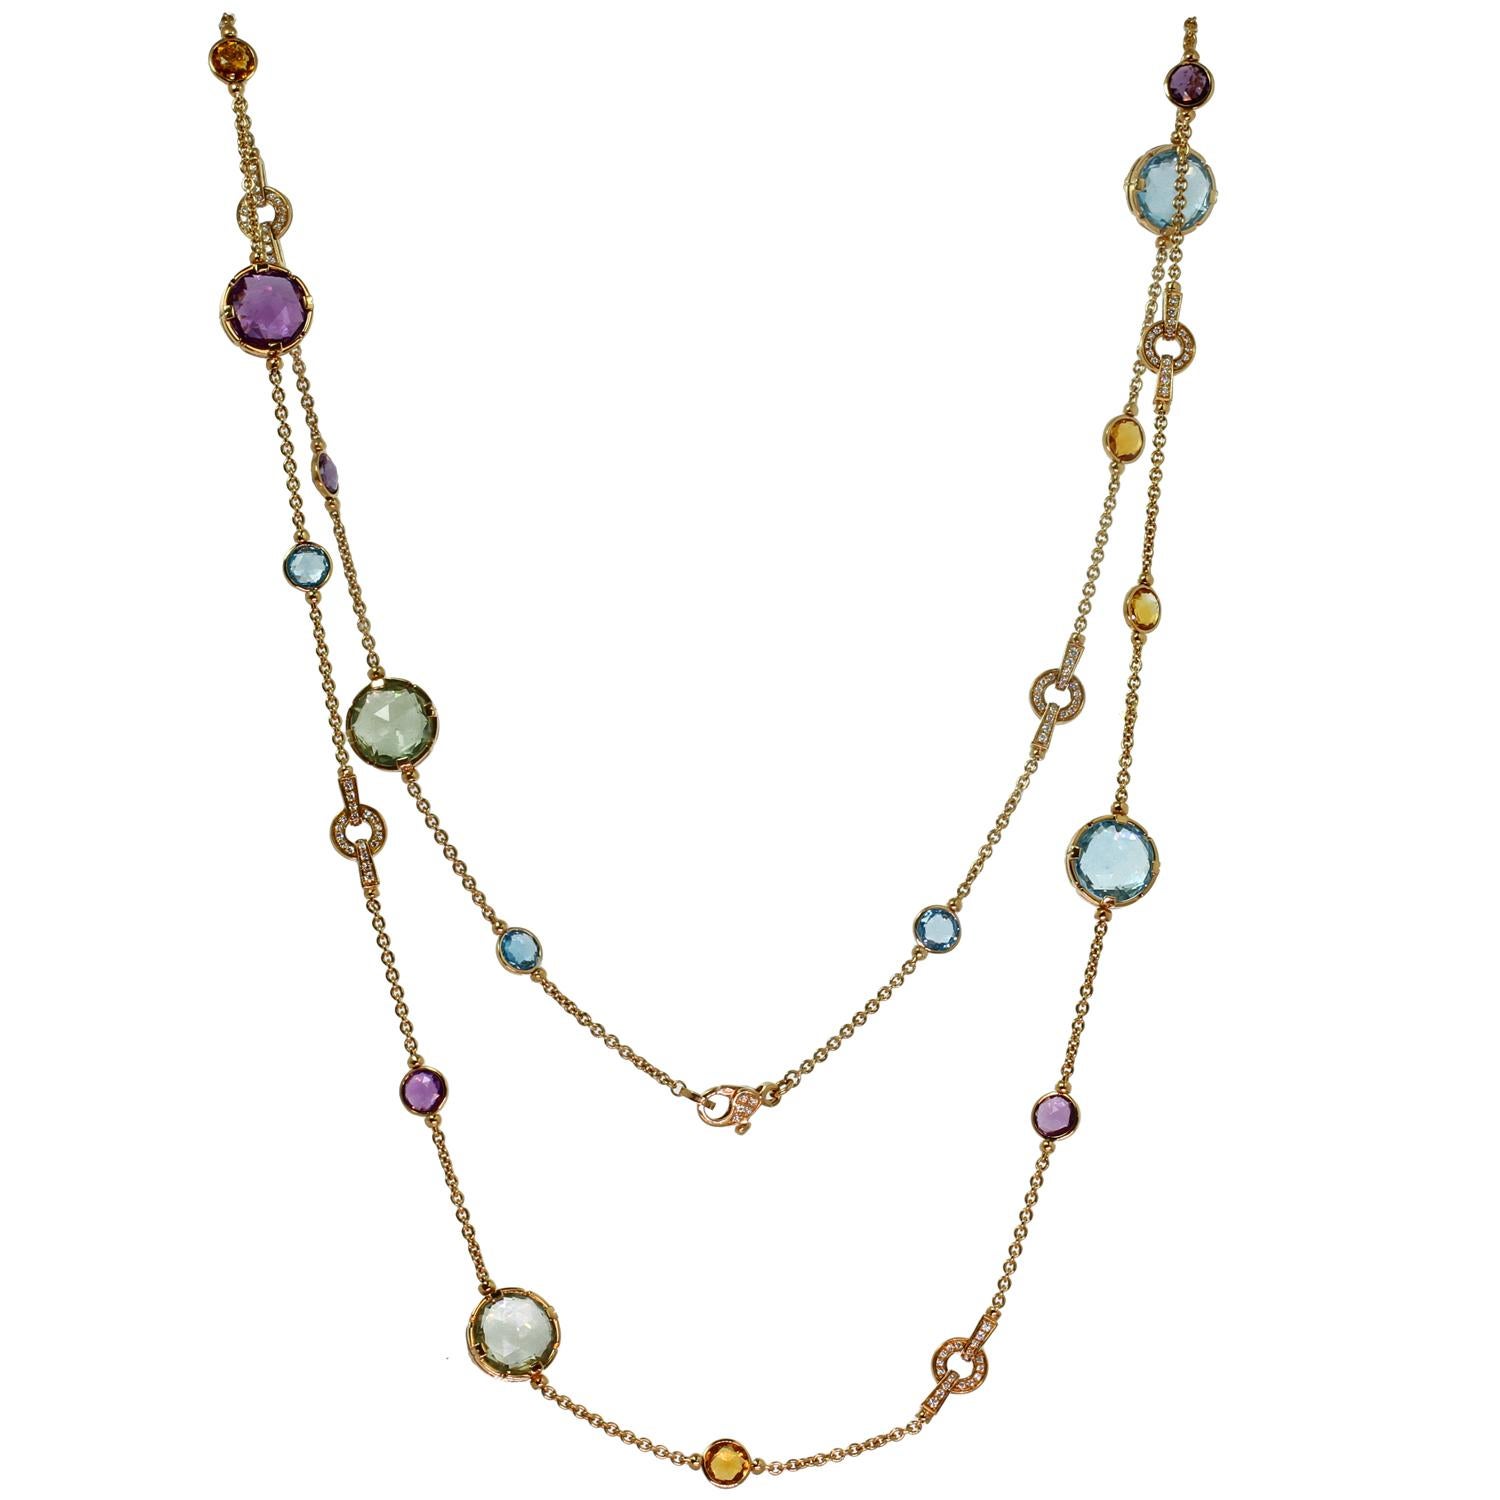 This rare and gorgeous long cocktail necklace from Bvlgari's vibrant Parentesi collection is crafted in 18k rose gold and set with  the Amethyst Citrine Blue Topaz Diamond Rose Gold  alternating links of round topaz, amethyst and citrine briolettes